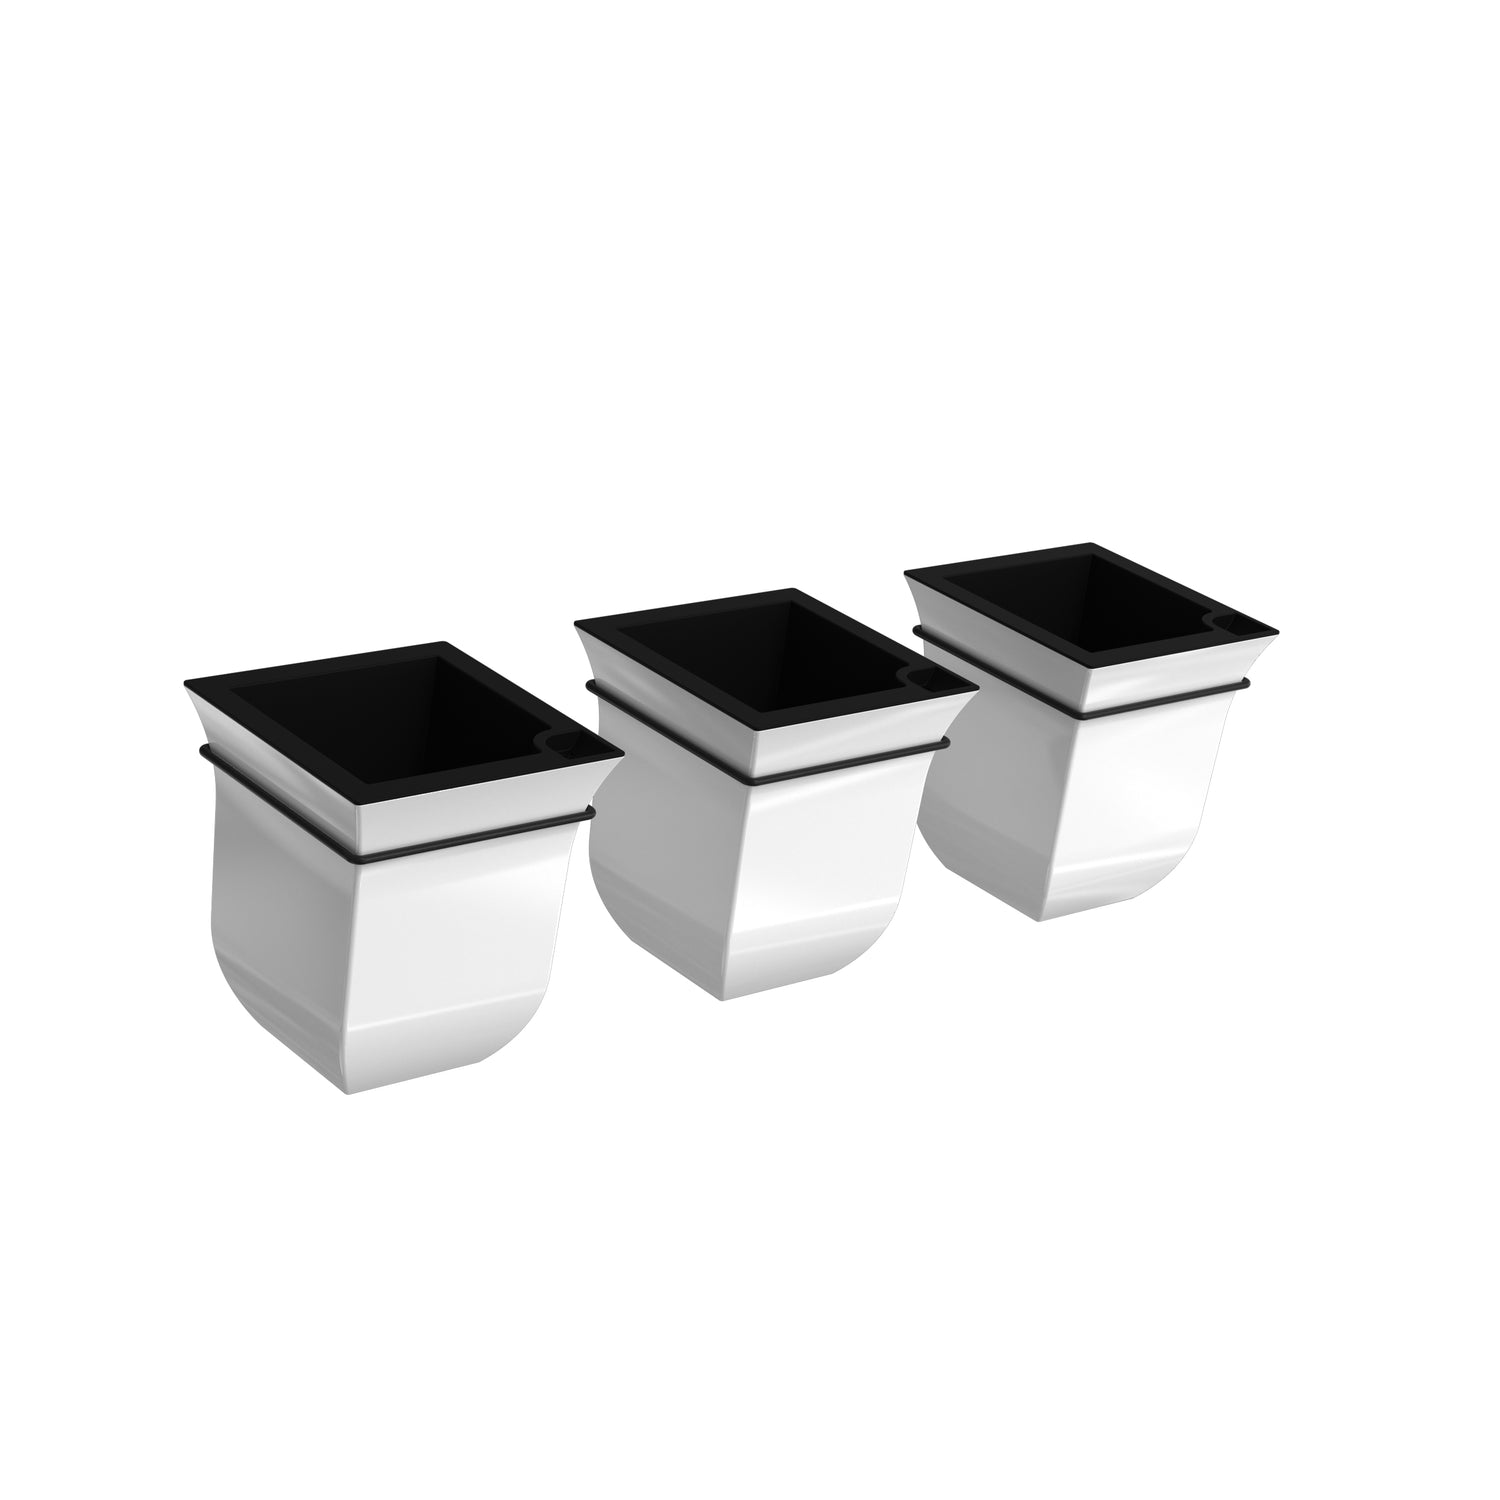 Valencia 8in Wall Mount Planter - 3-Pack